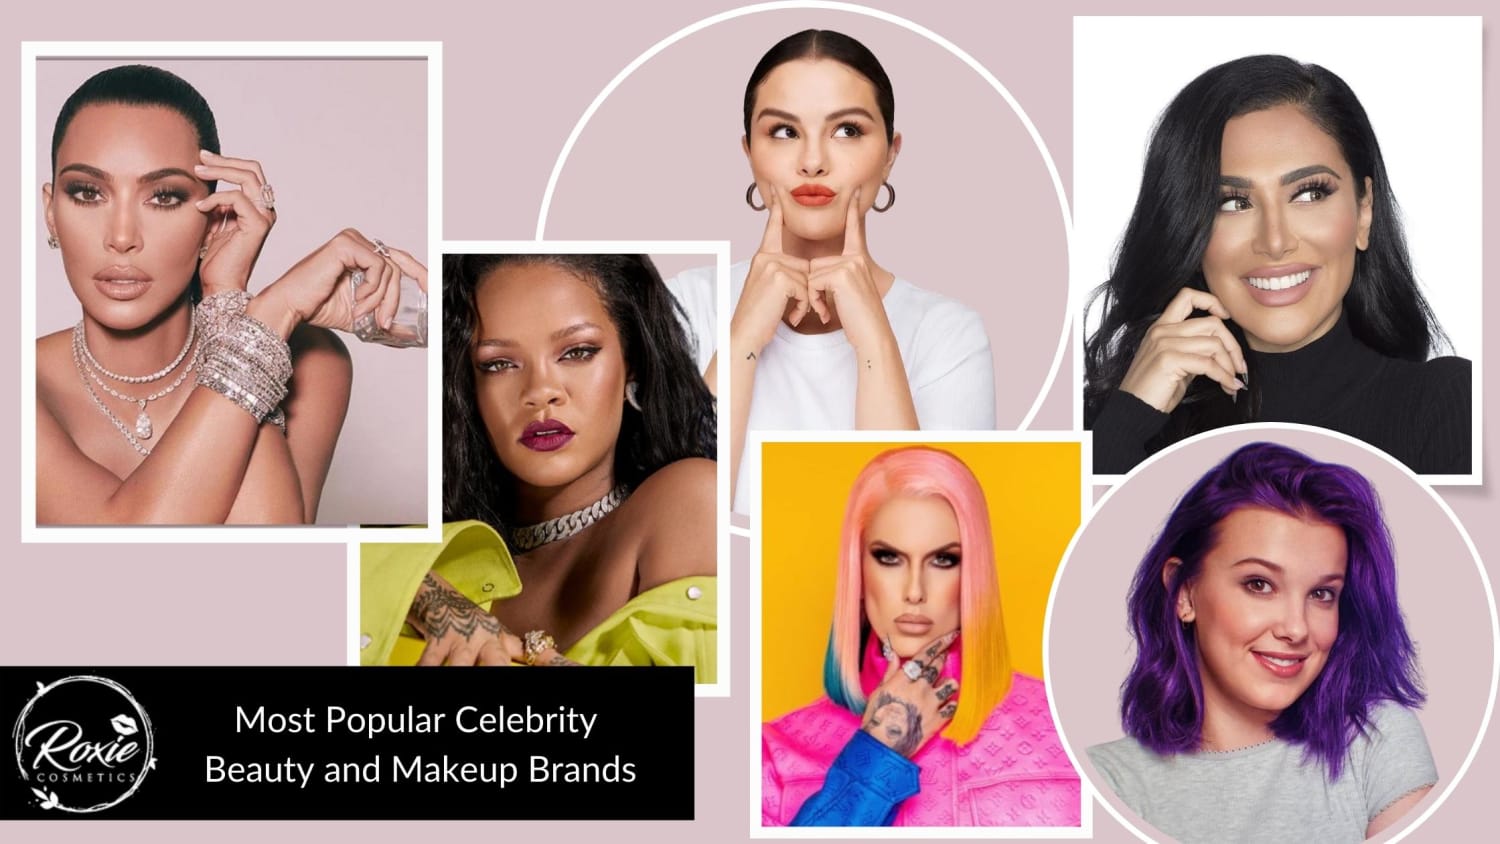 The Fenty craze: How other beauty brands can compete online